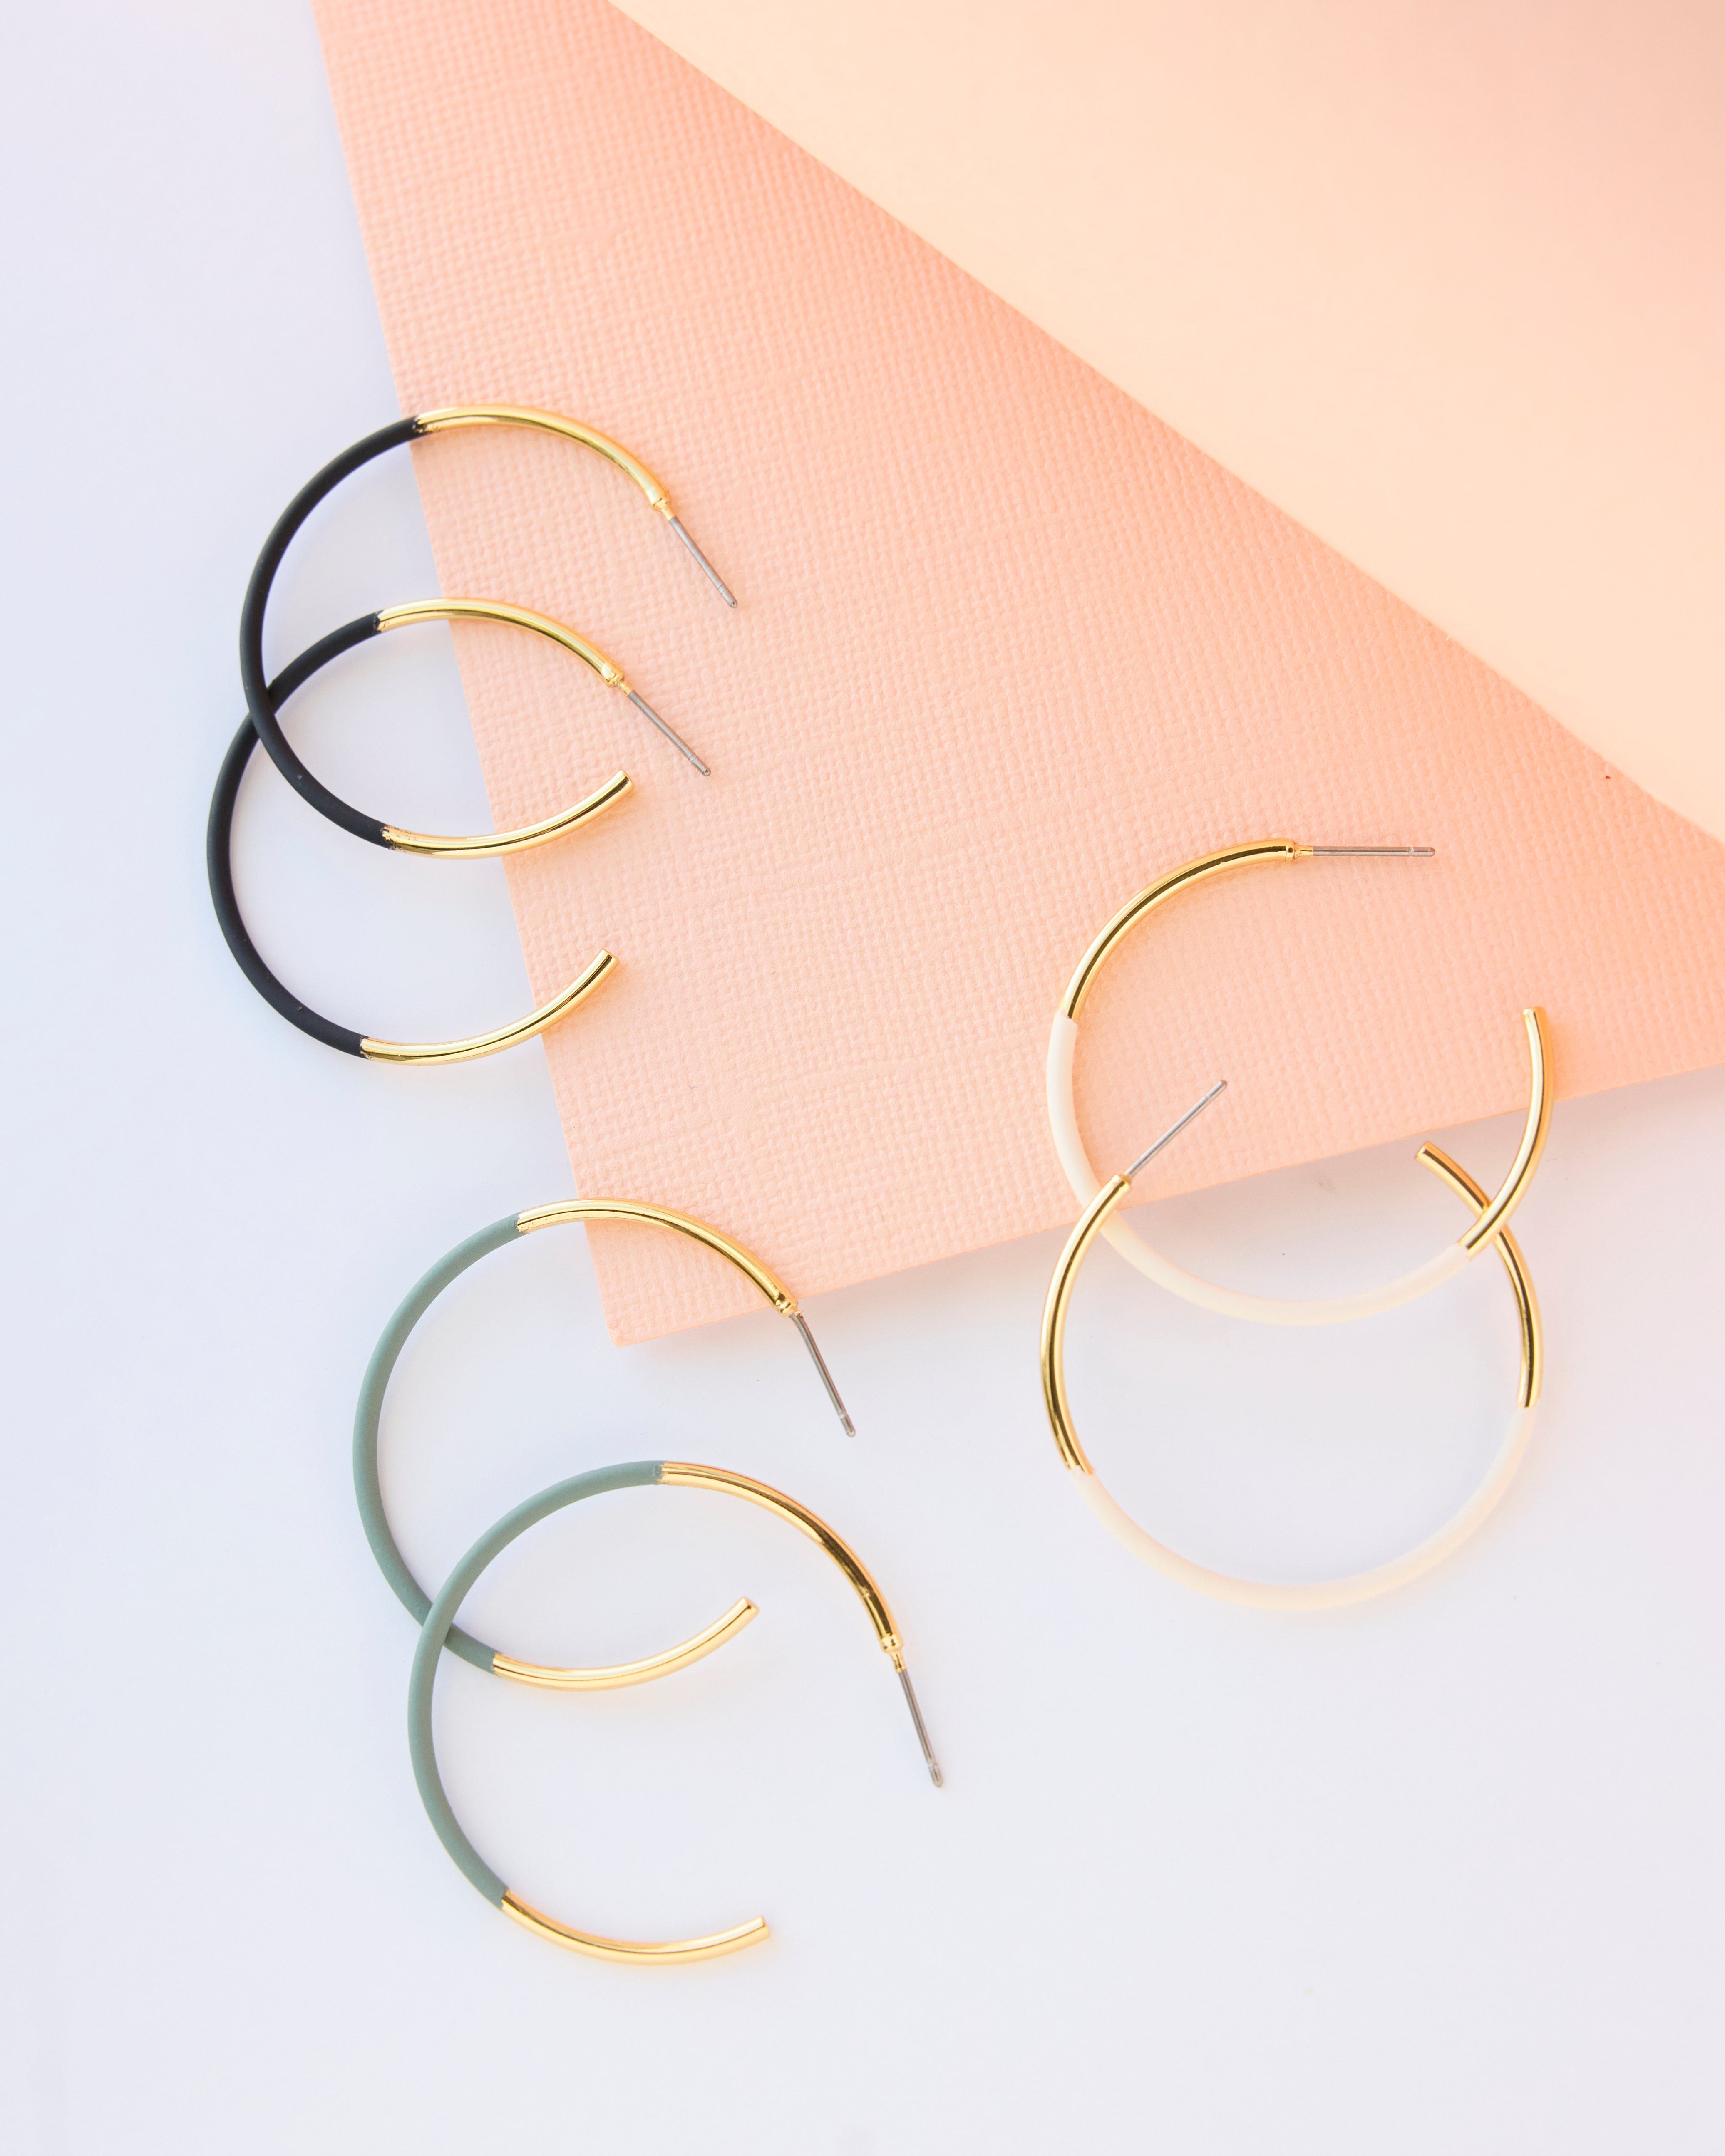 Three-piece earring set of hoops in gold, green, black and white.